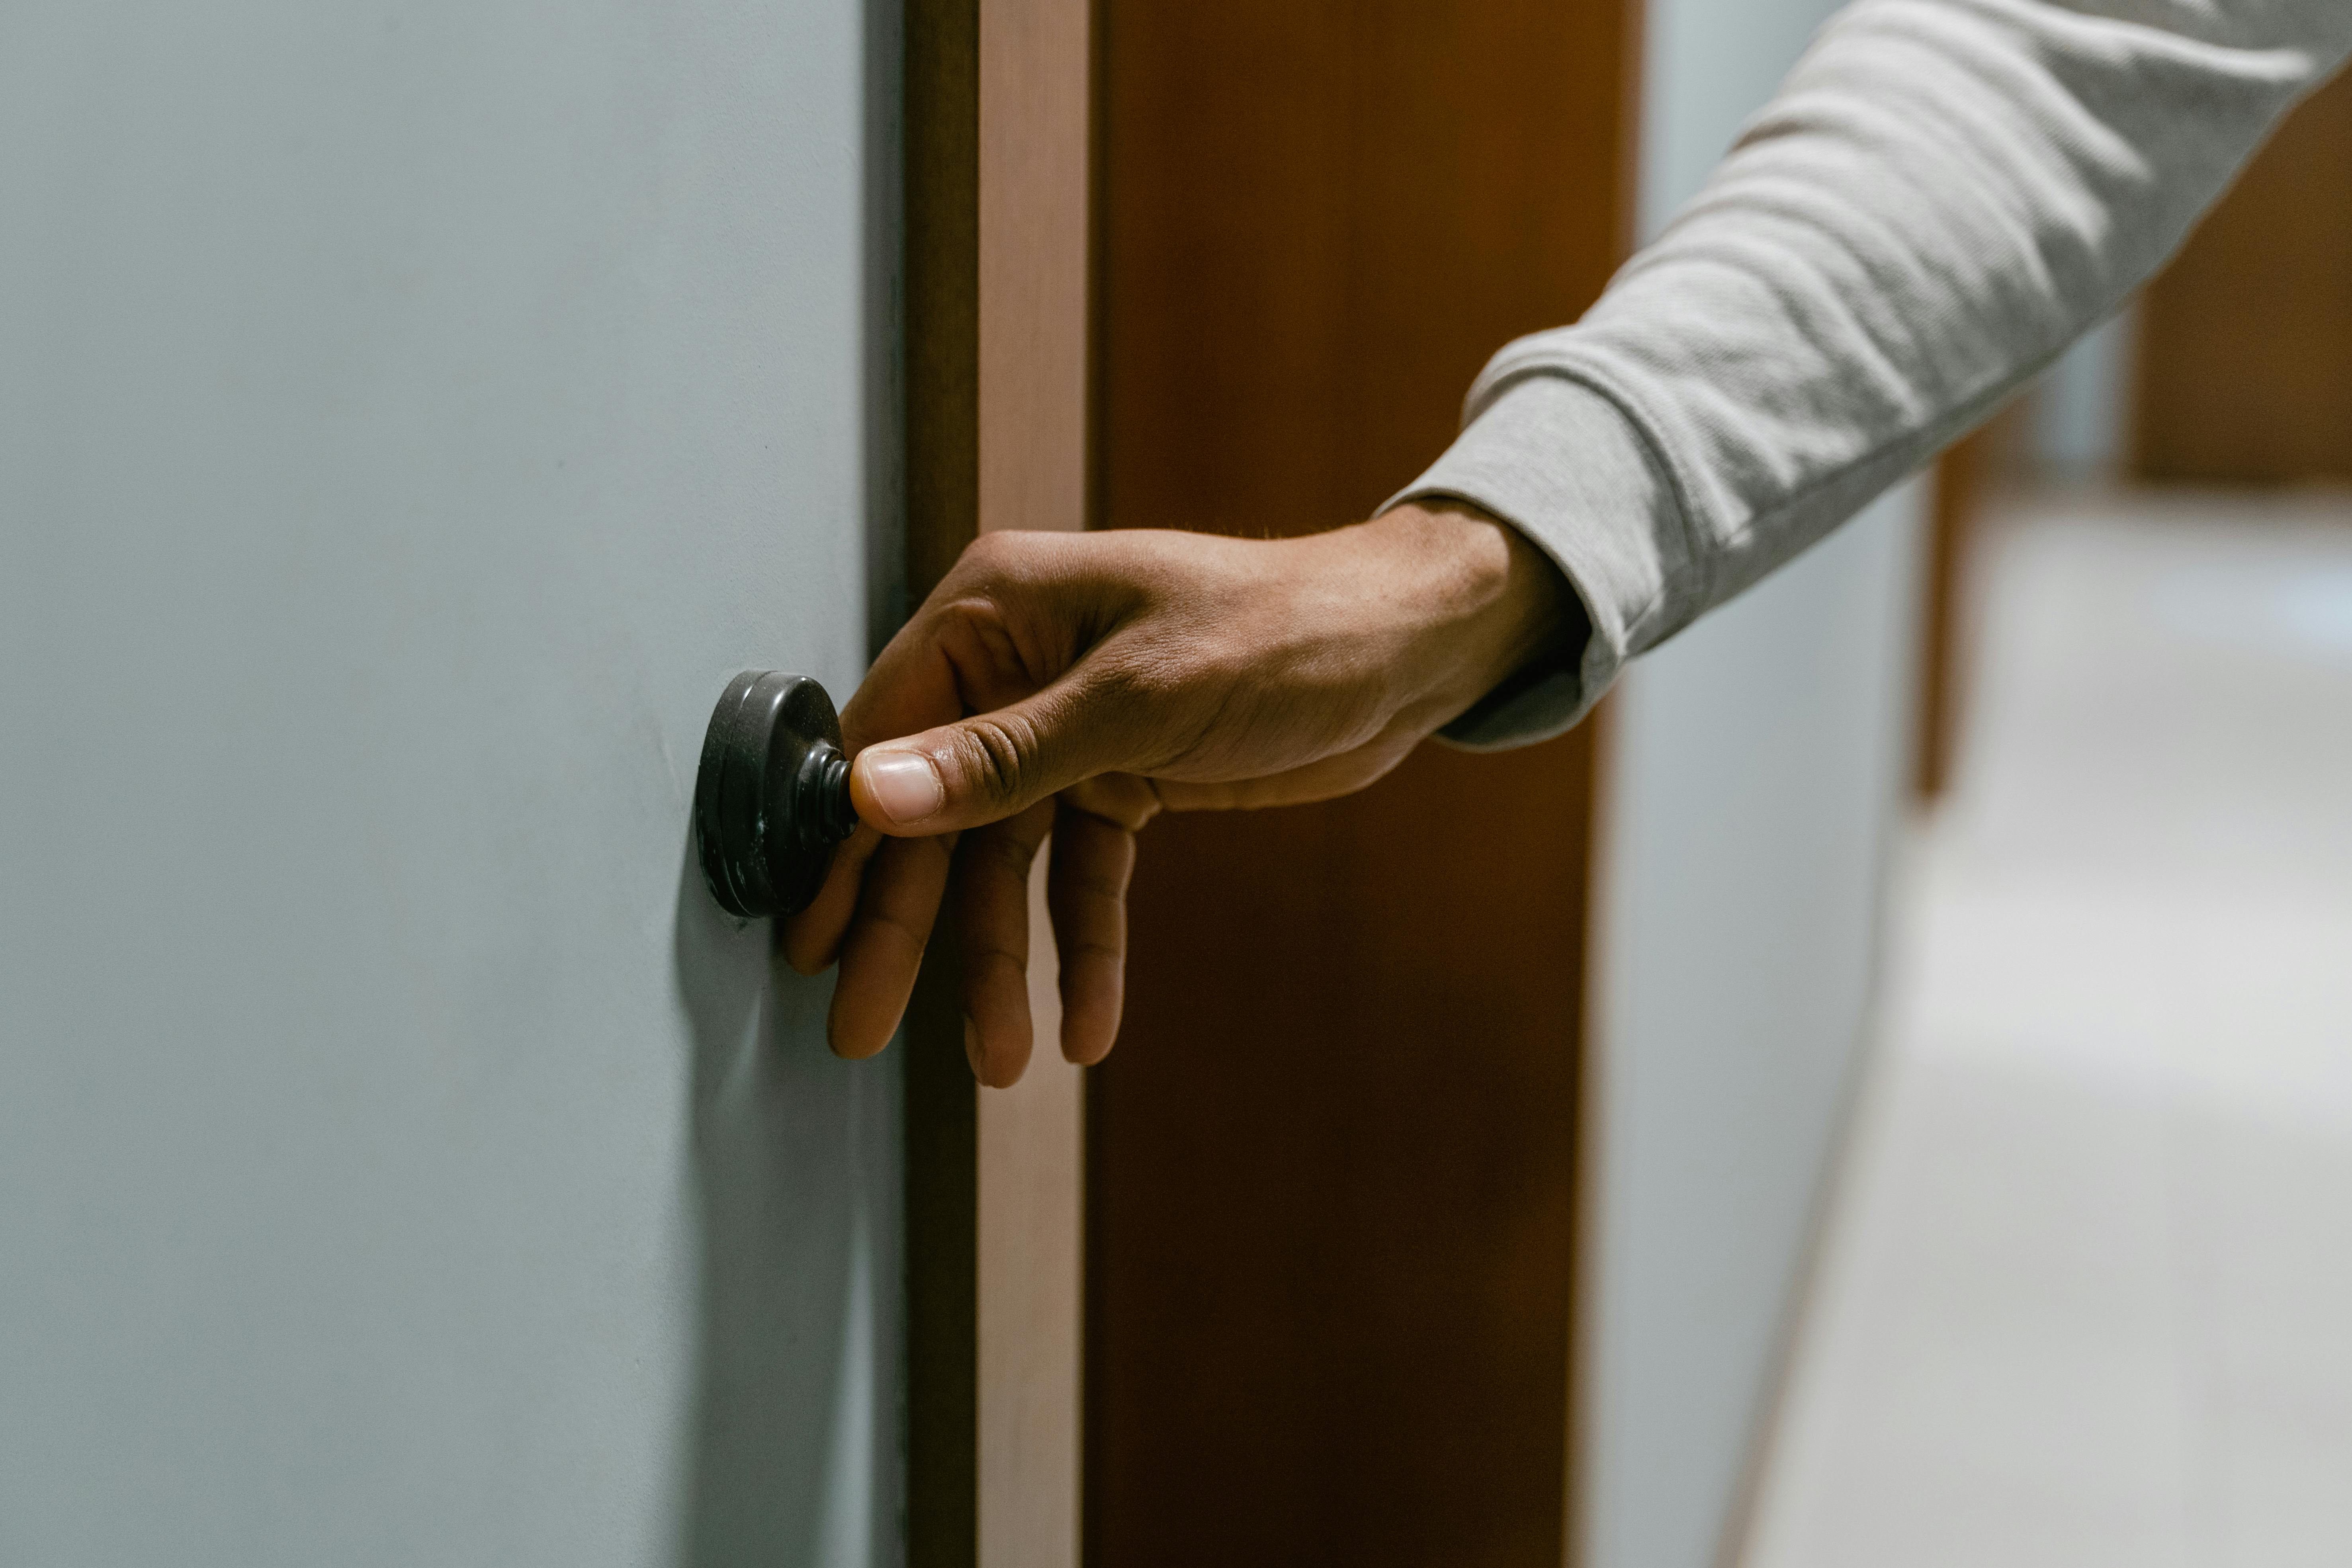 A person ringing the doorbell | Source: Pexels